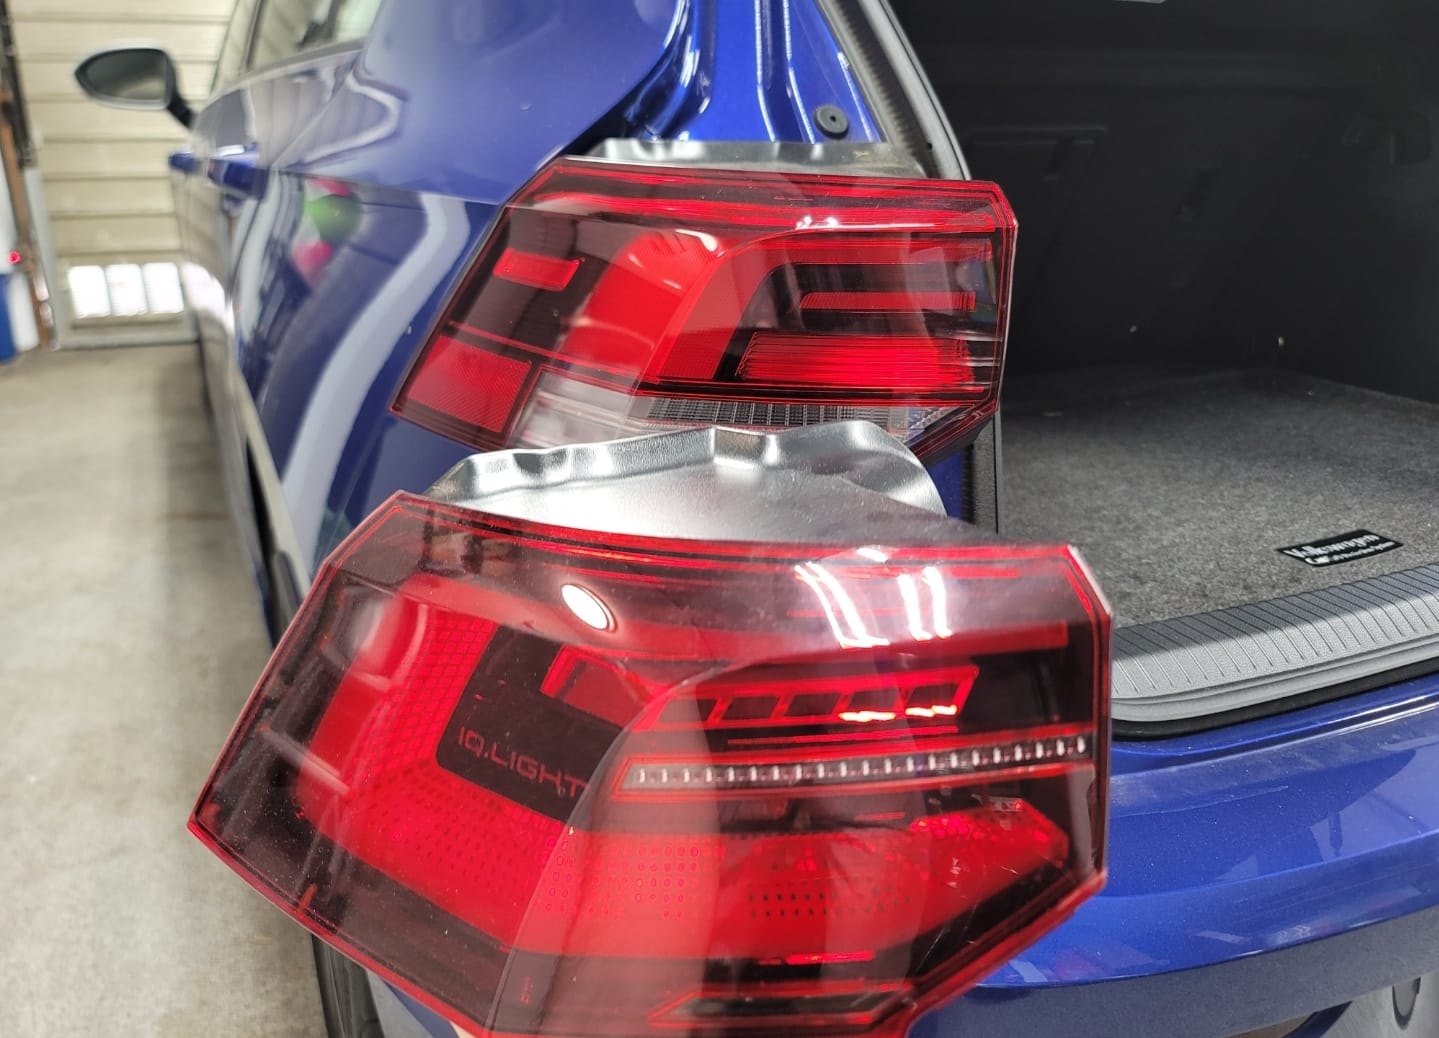 MK8 IQ Tail Lights with Direct to BCM Harness